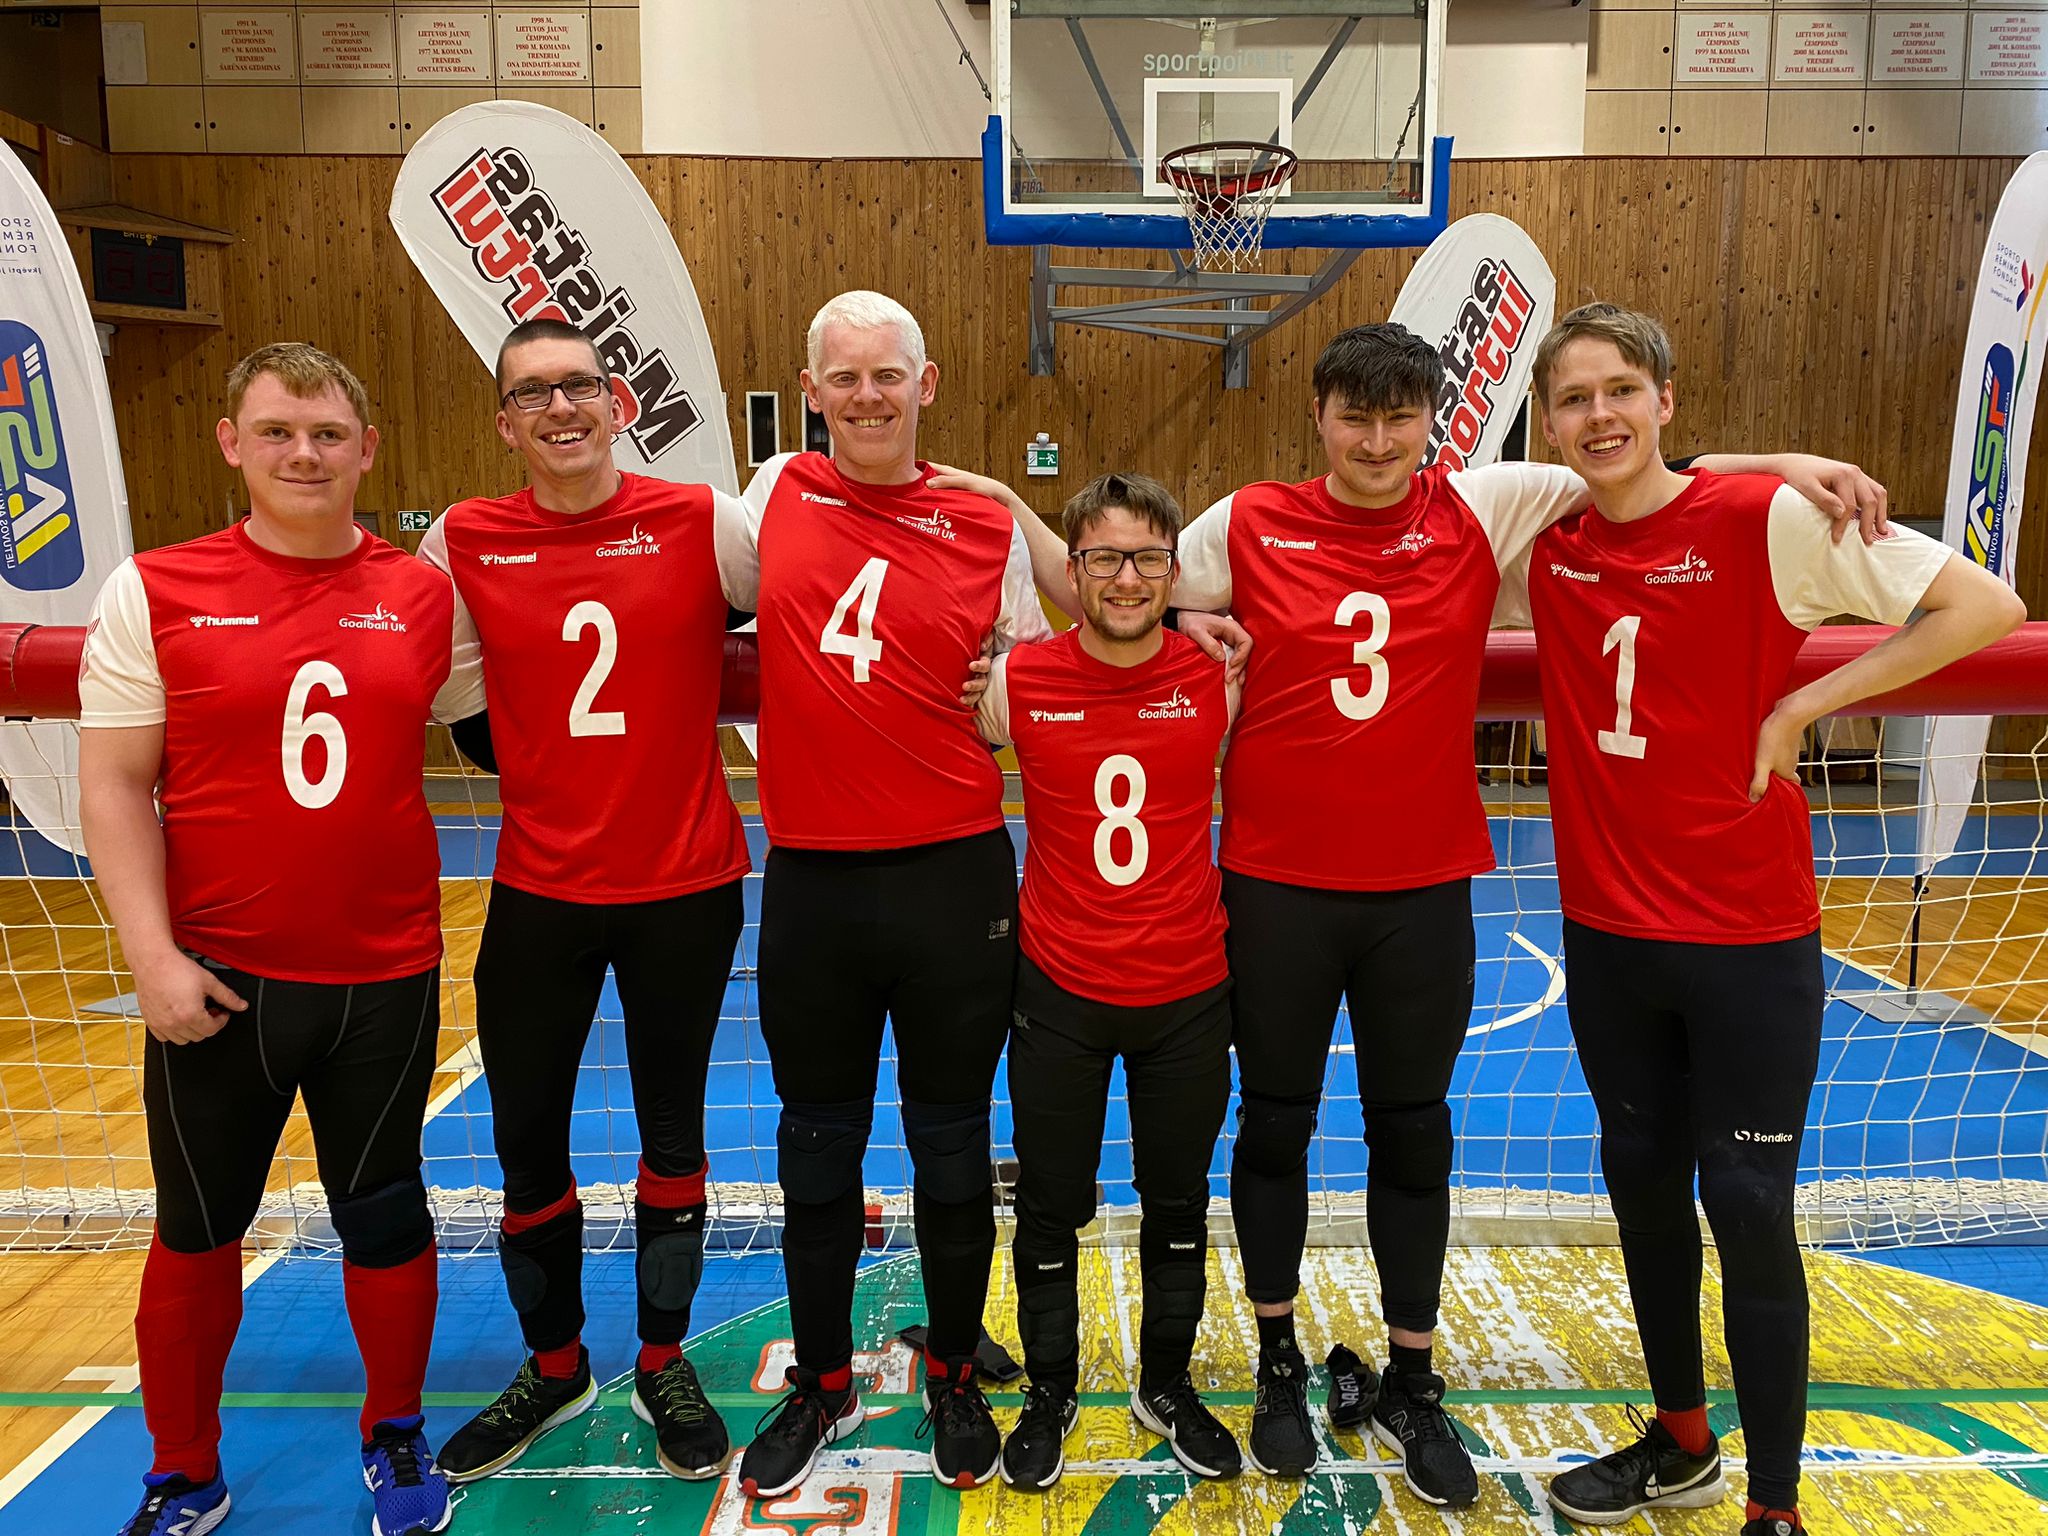 GB Men pose for a smily group photo in Lithuania wearing their red GB kit